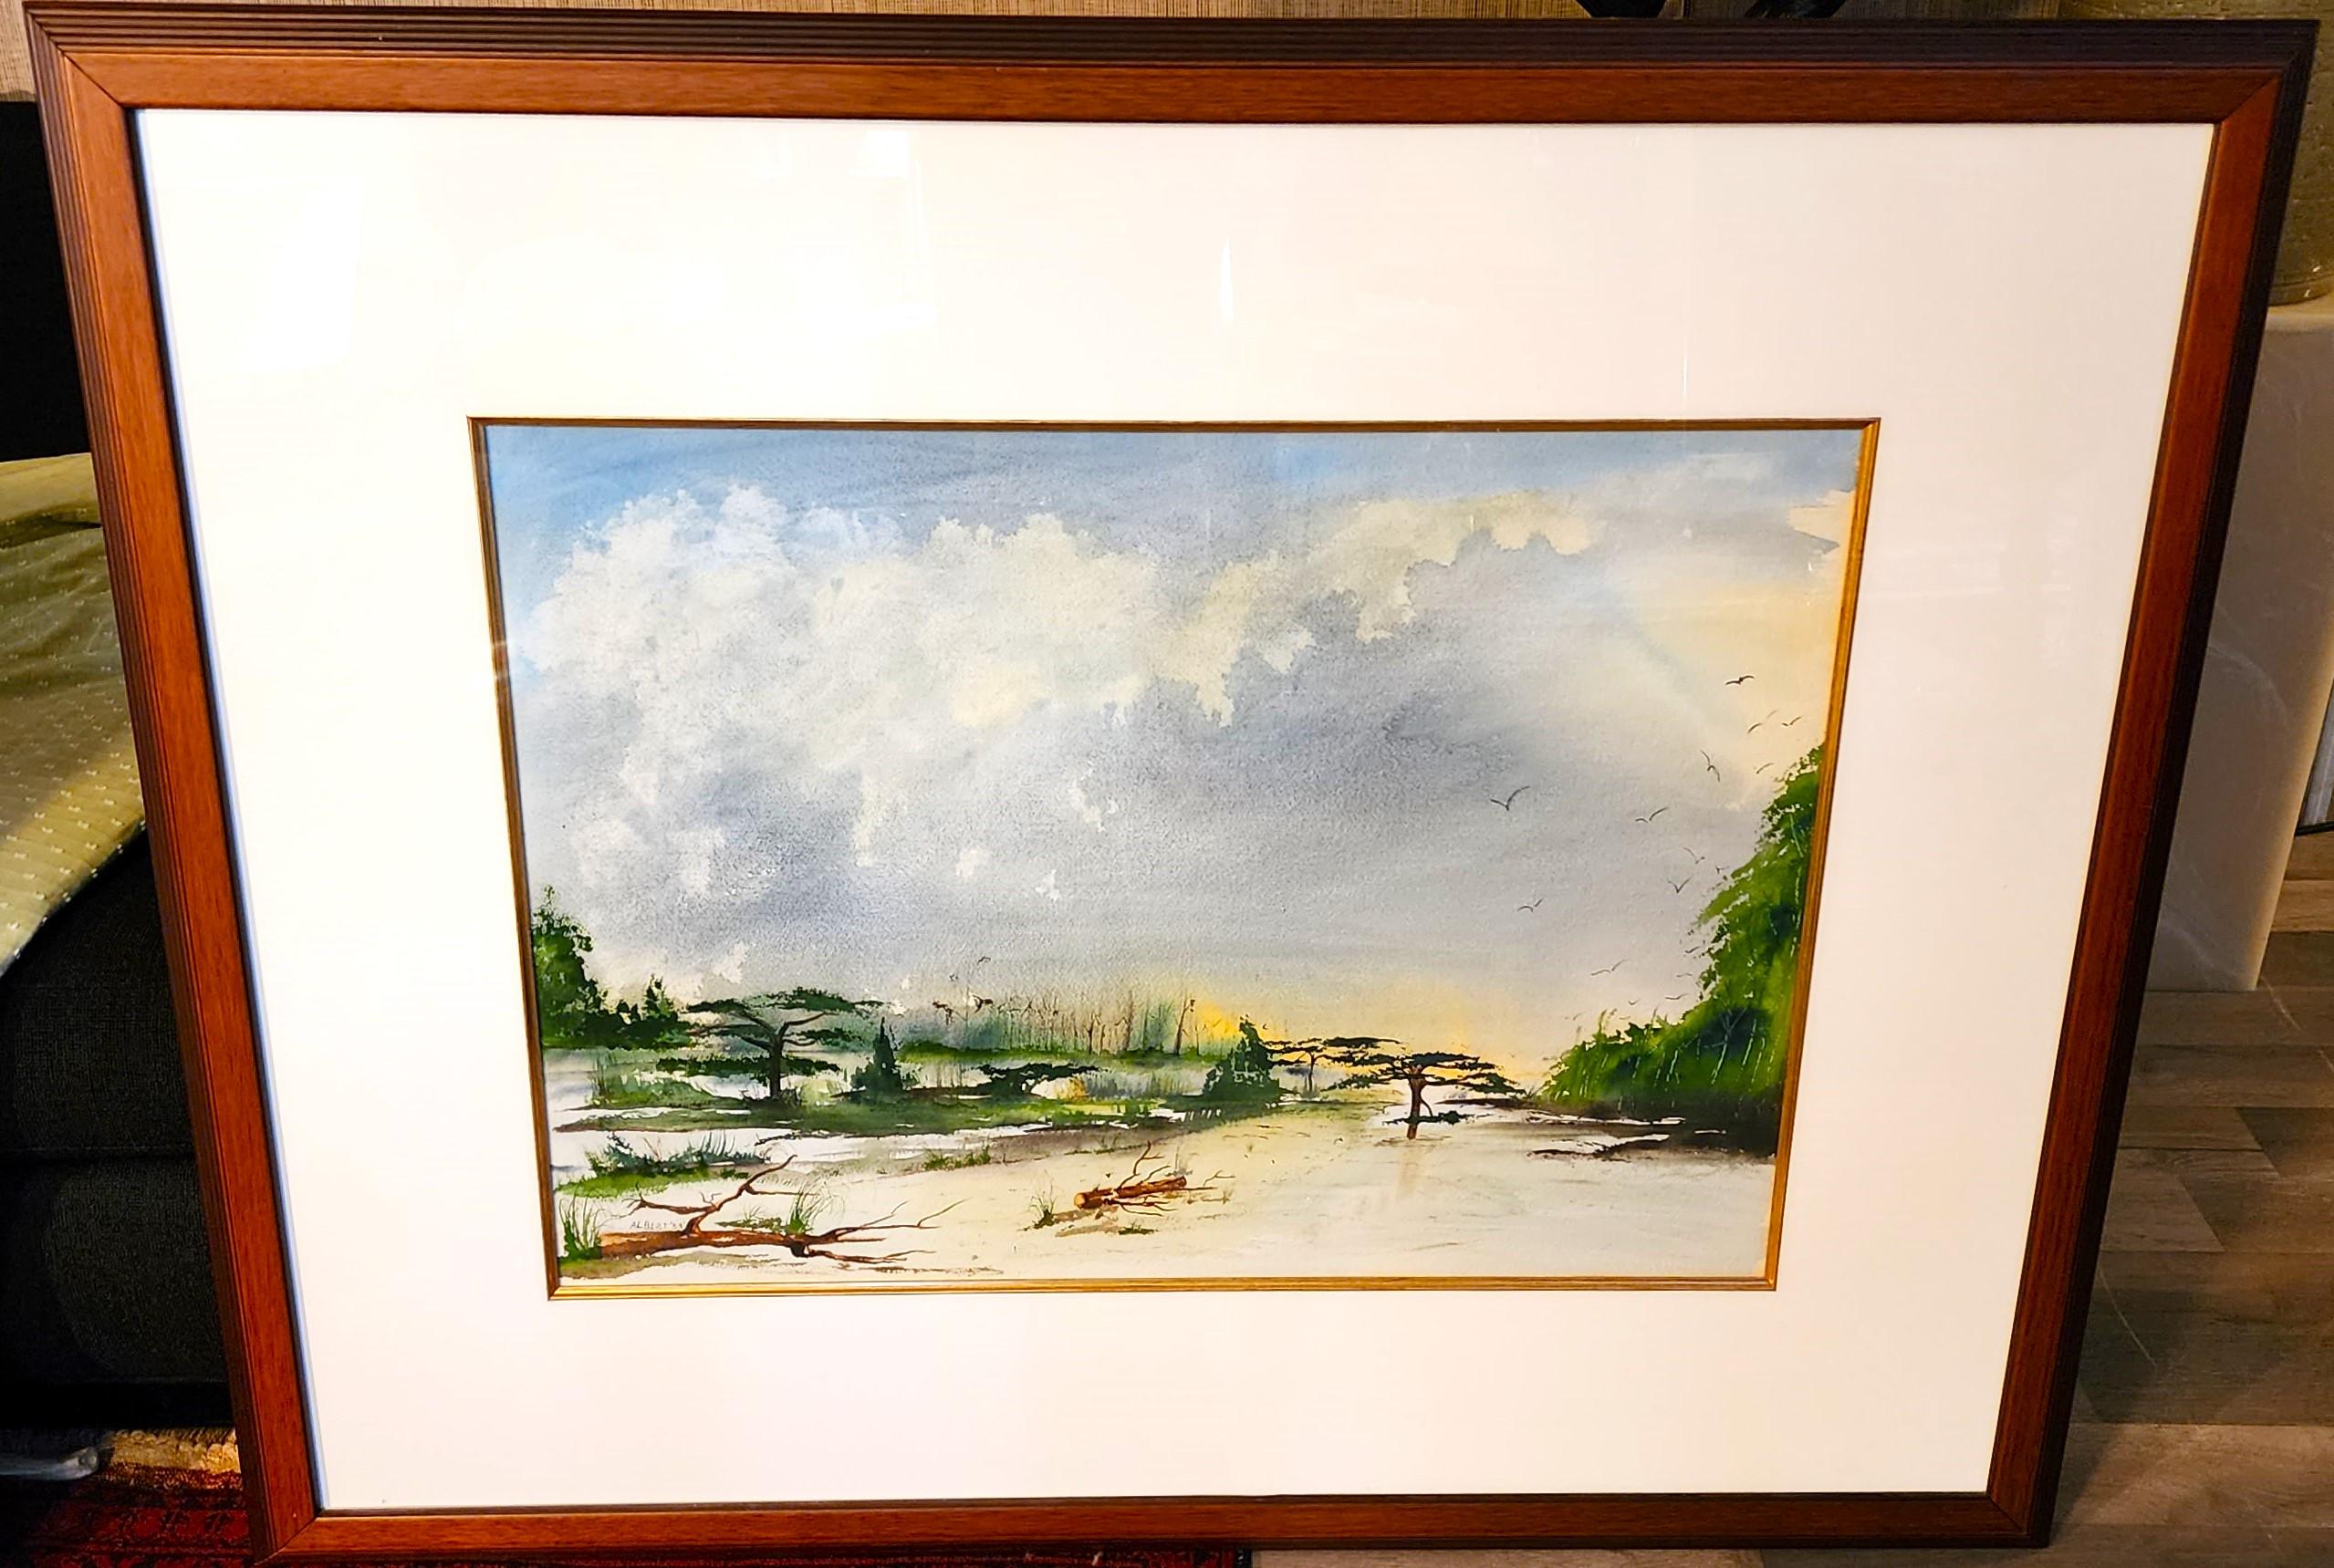 For FULL item description click on CONTINUE READING at the bottom of this page.

Offering One Of Our Recent Palm Beach Estate Fine Art Acquisitions Of A
Signed 1989 Albert Swayhoover Coastal Scene Watercolor Painting

Approximate Measurements